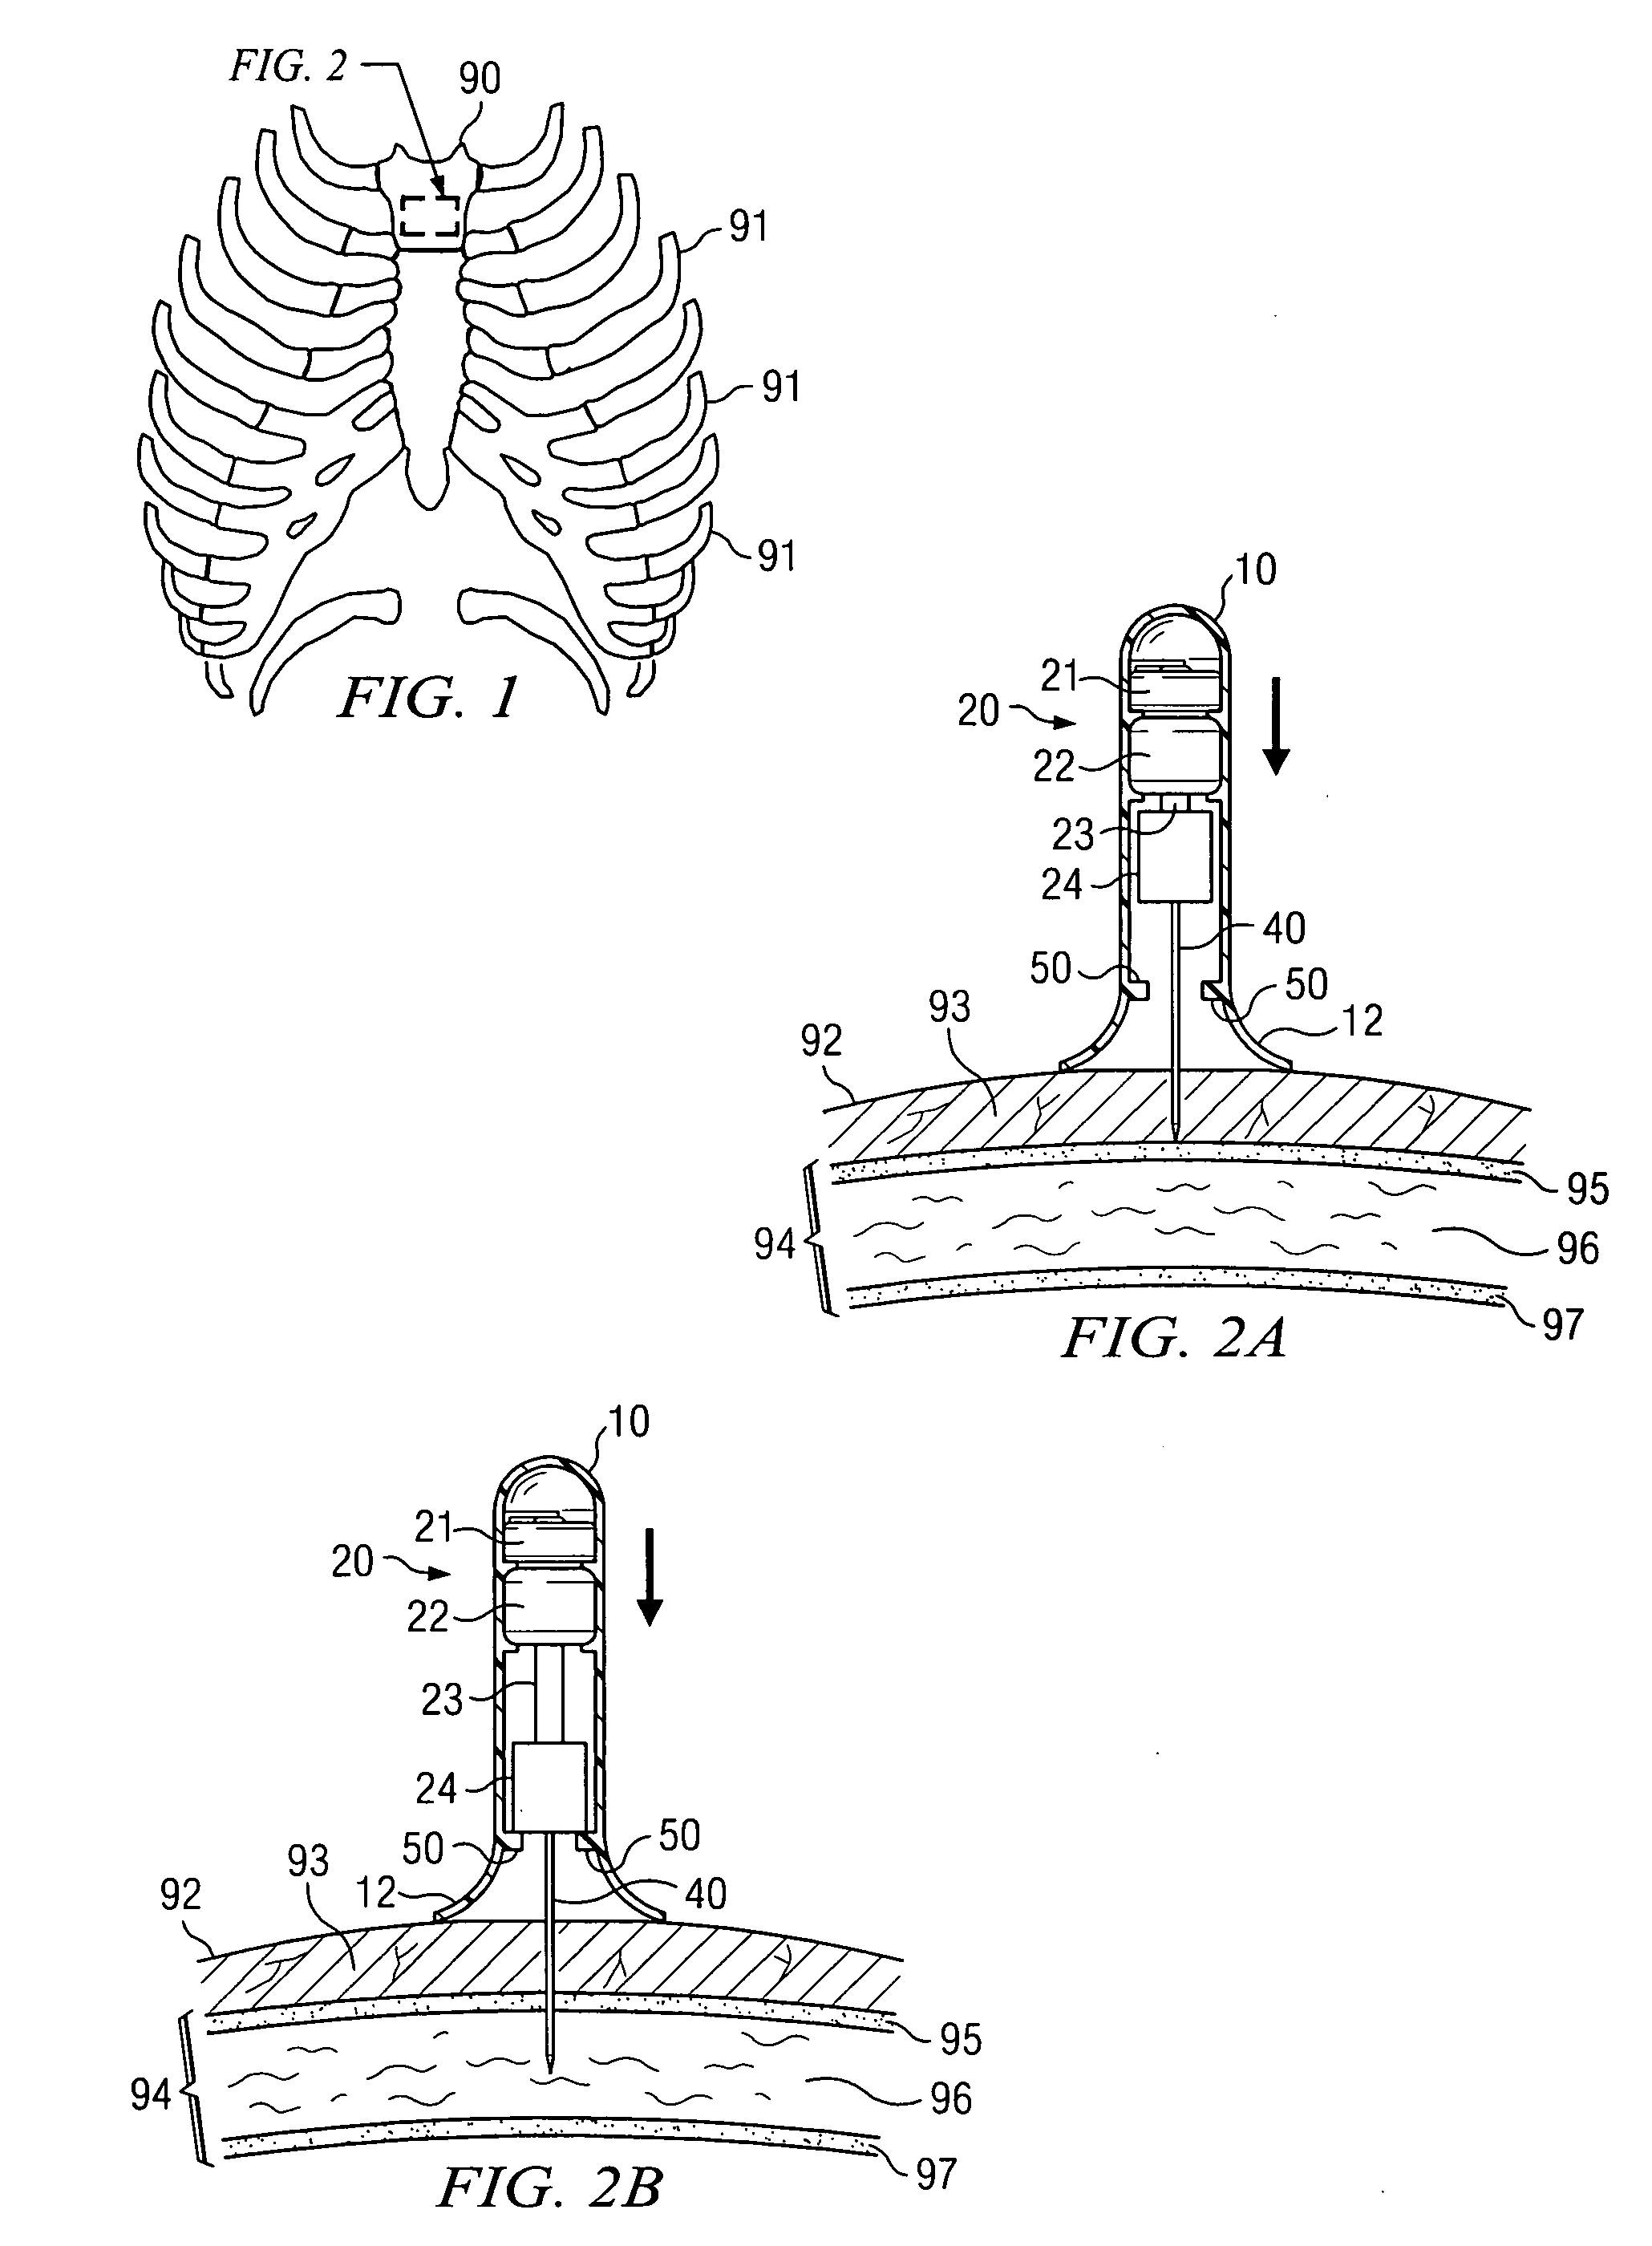 Apparatus and method for accessing the bone marrow